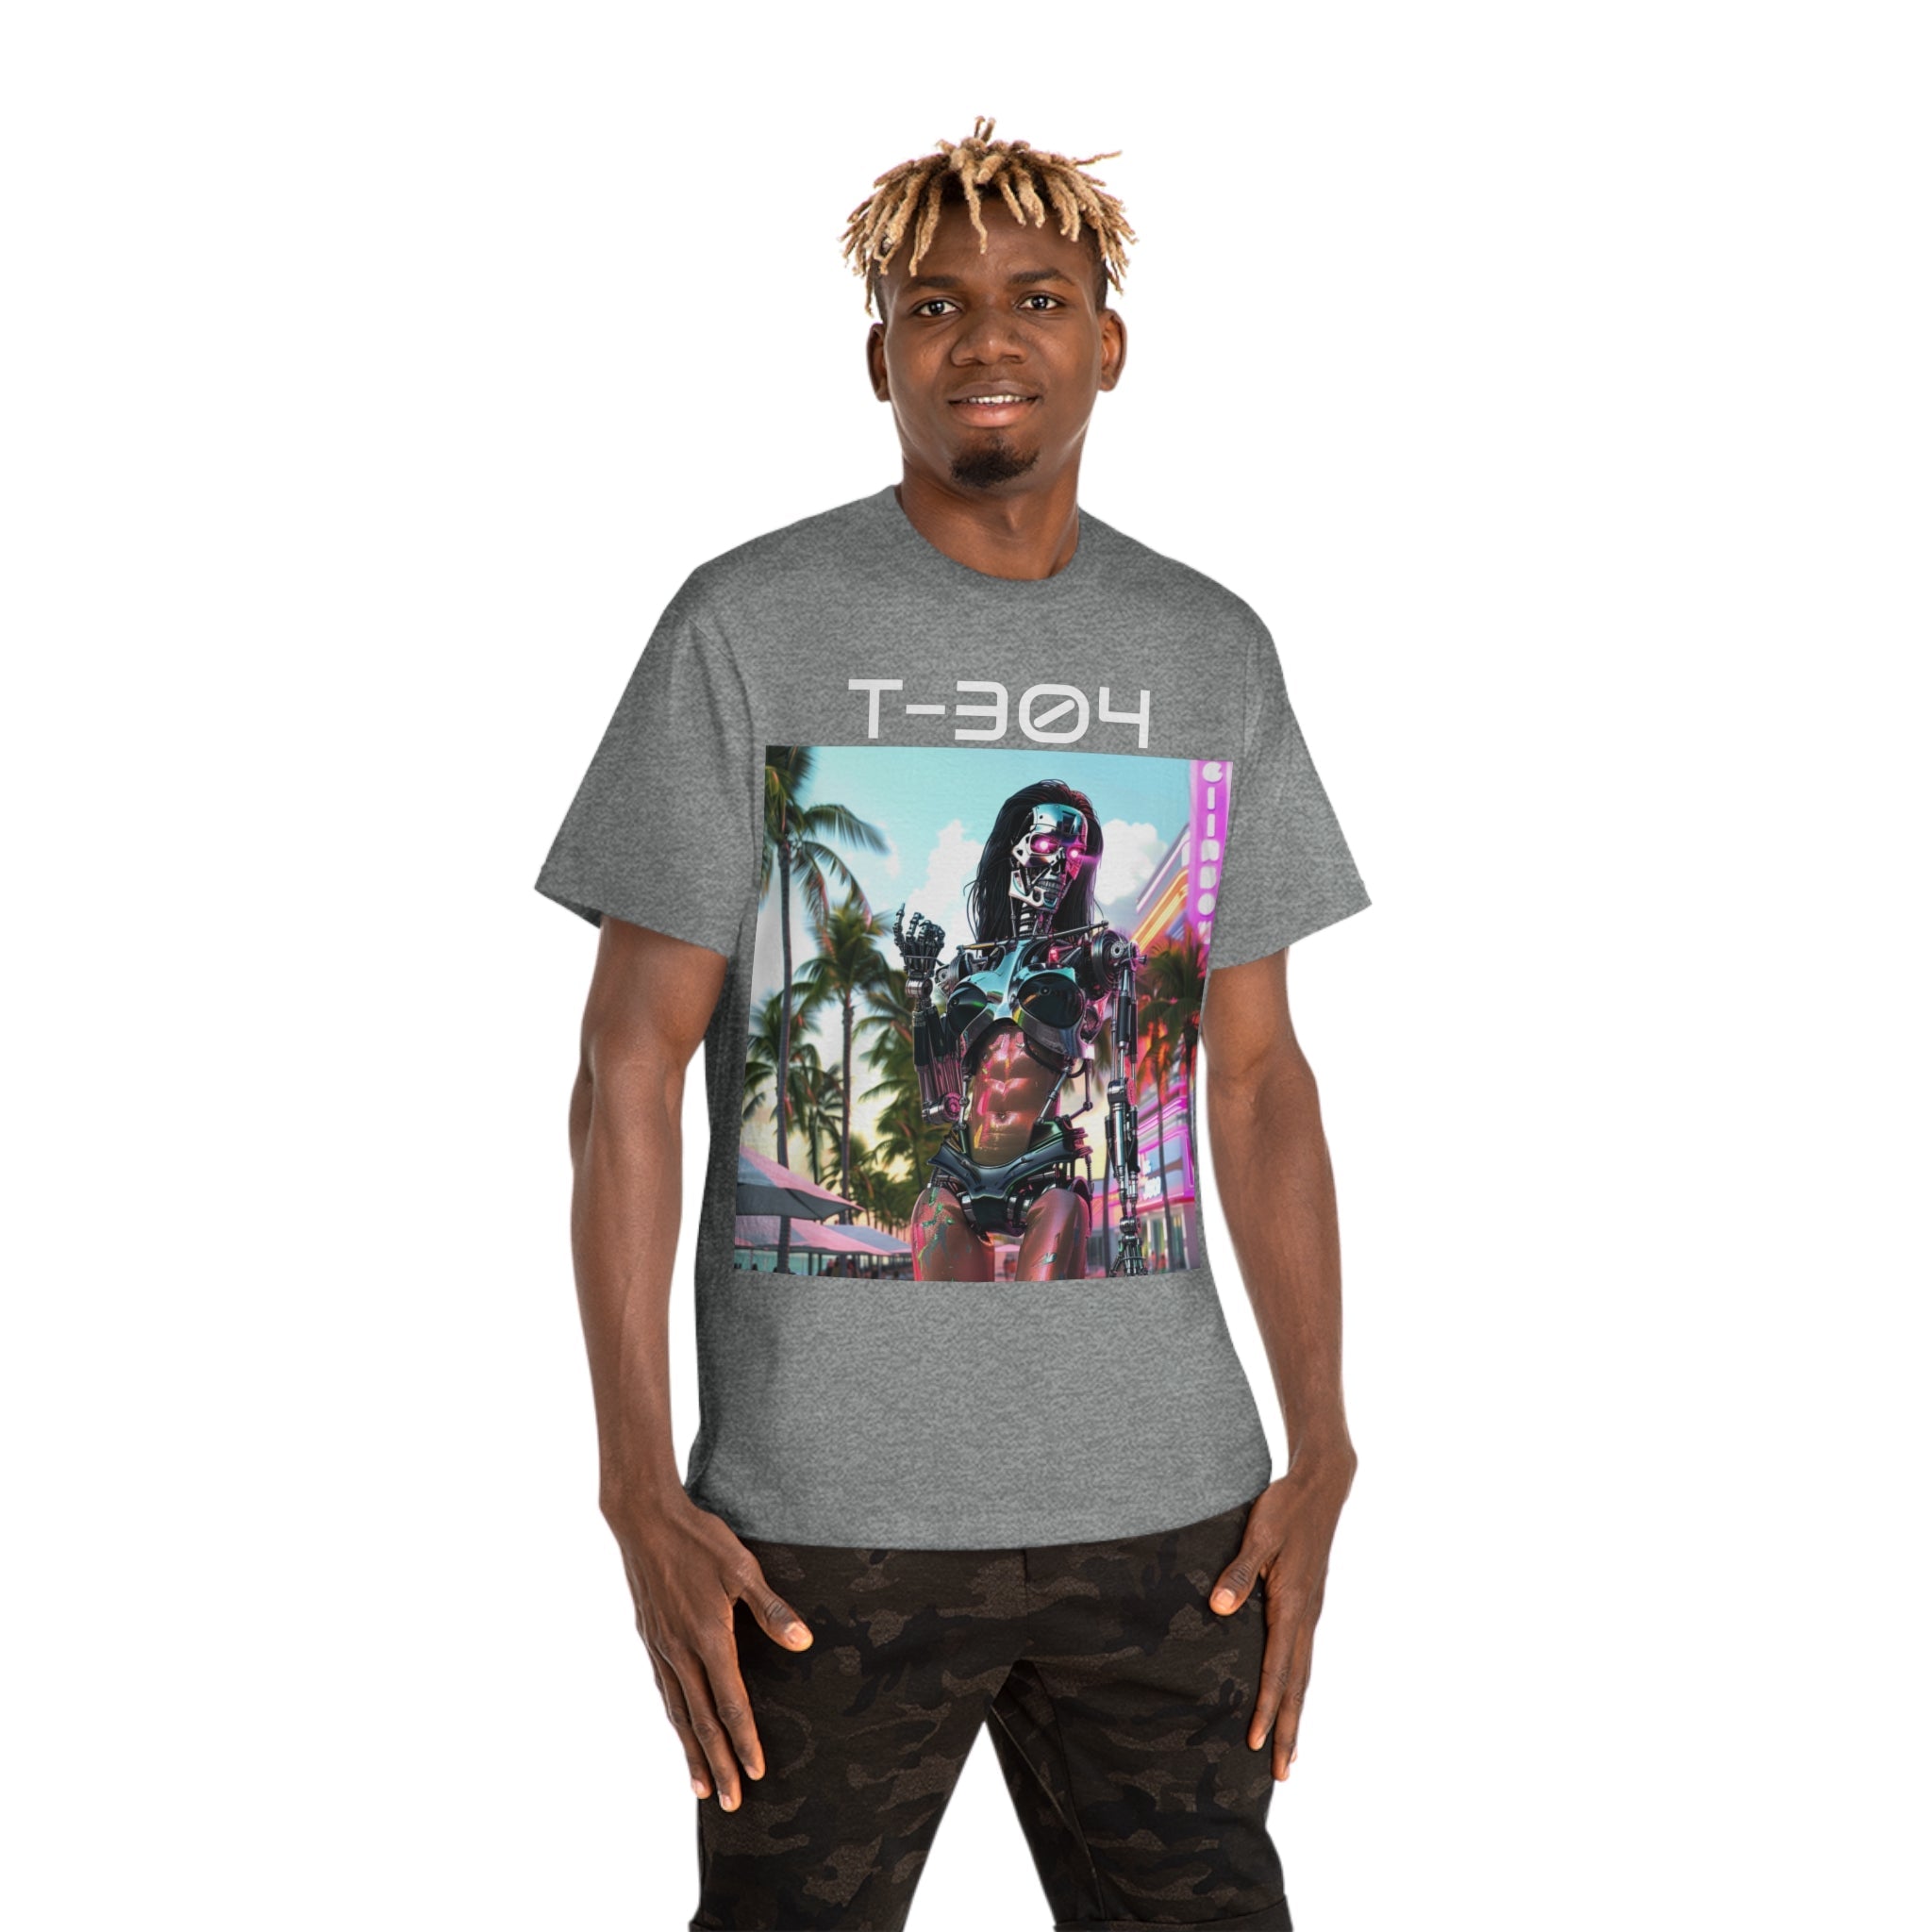 The image highlights a stylish unisex Hammer™ T-shirt, featuring a vibrant, retro sci-fi inspired design with a glamorous twist on the Terminator theme. The tee showcases the high-quality fabric and the fashion-forward print that merges vintage charm with contemporary fashion sensibilities.